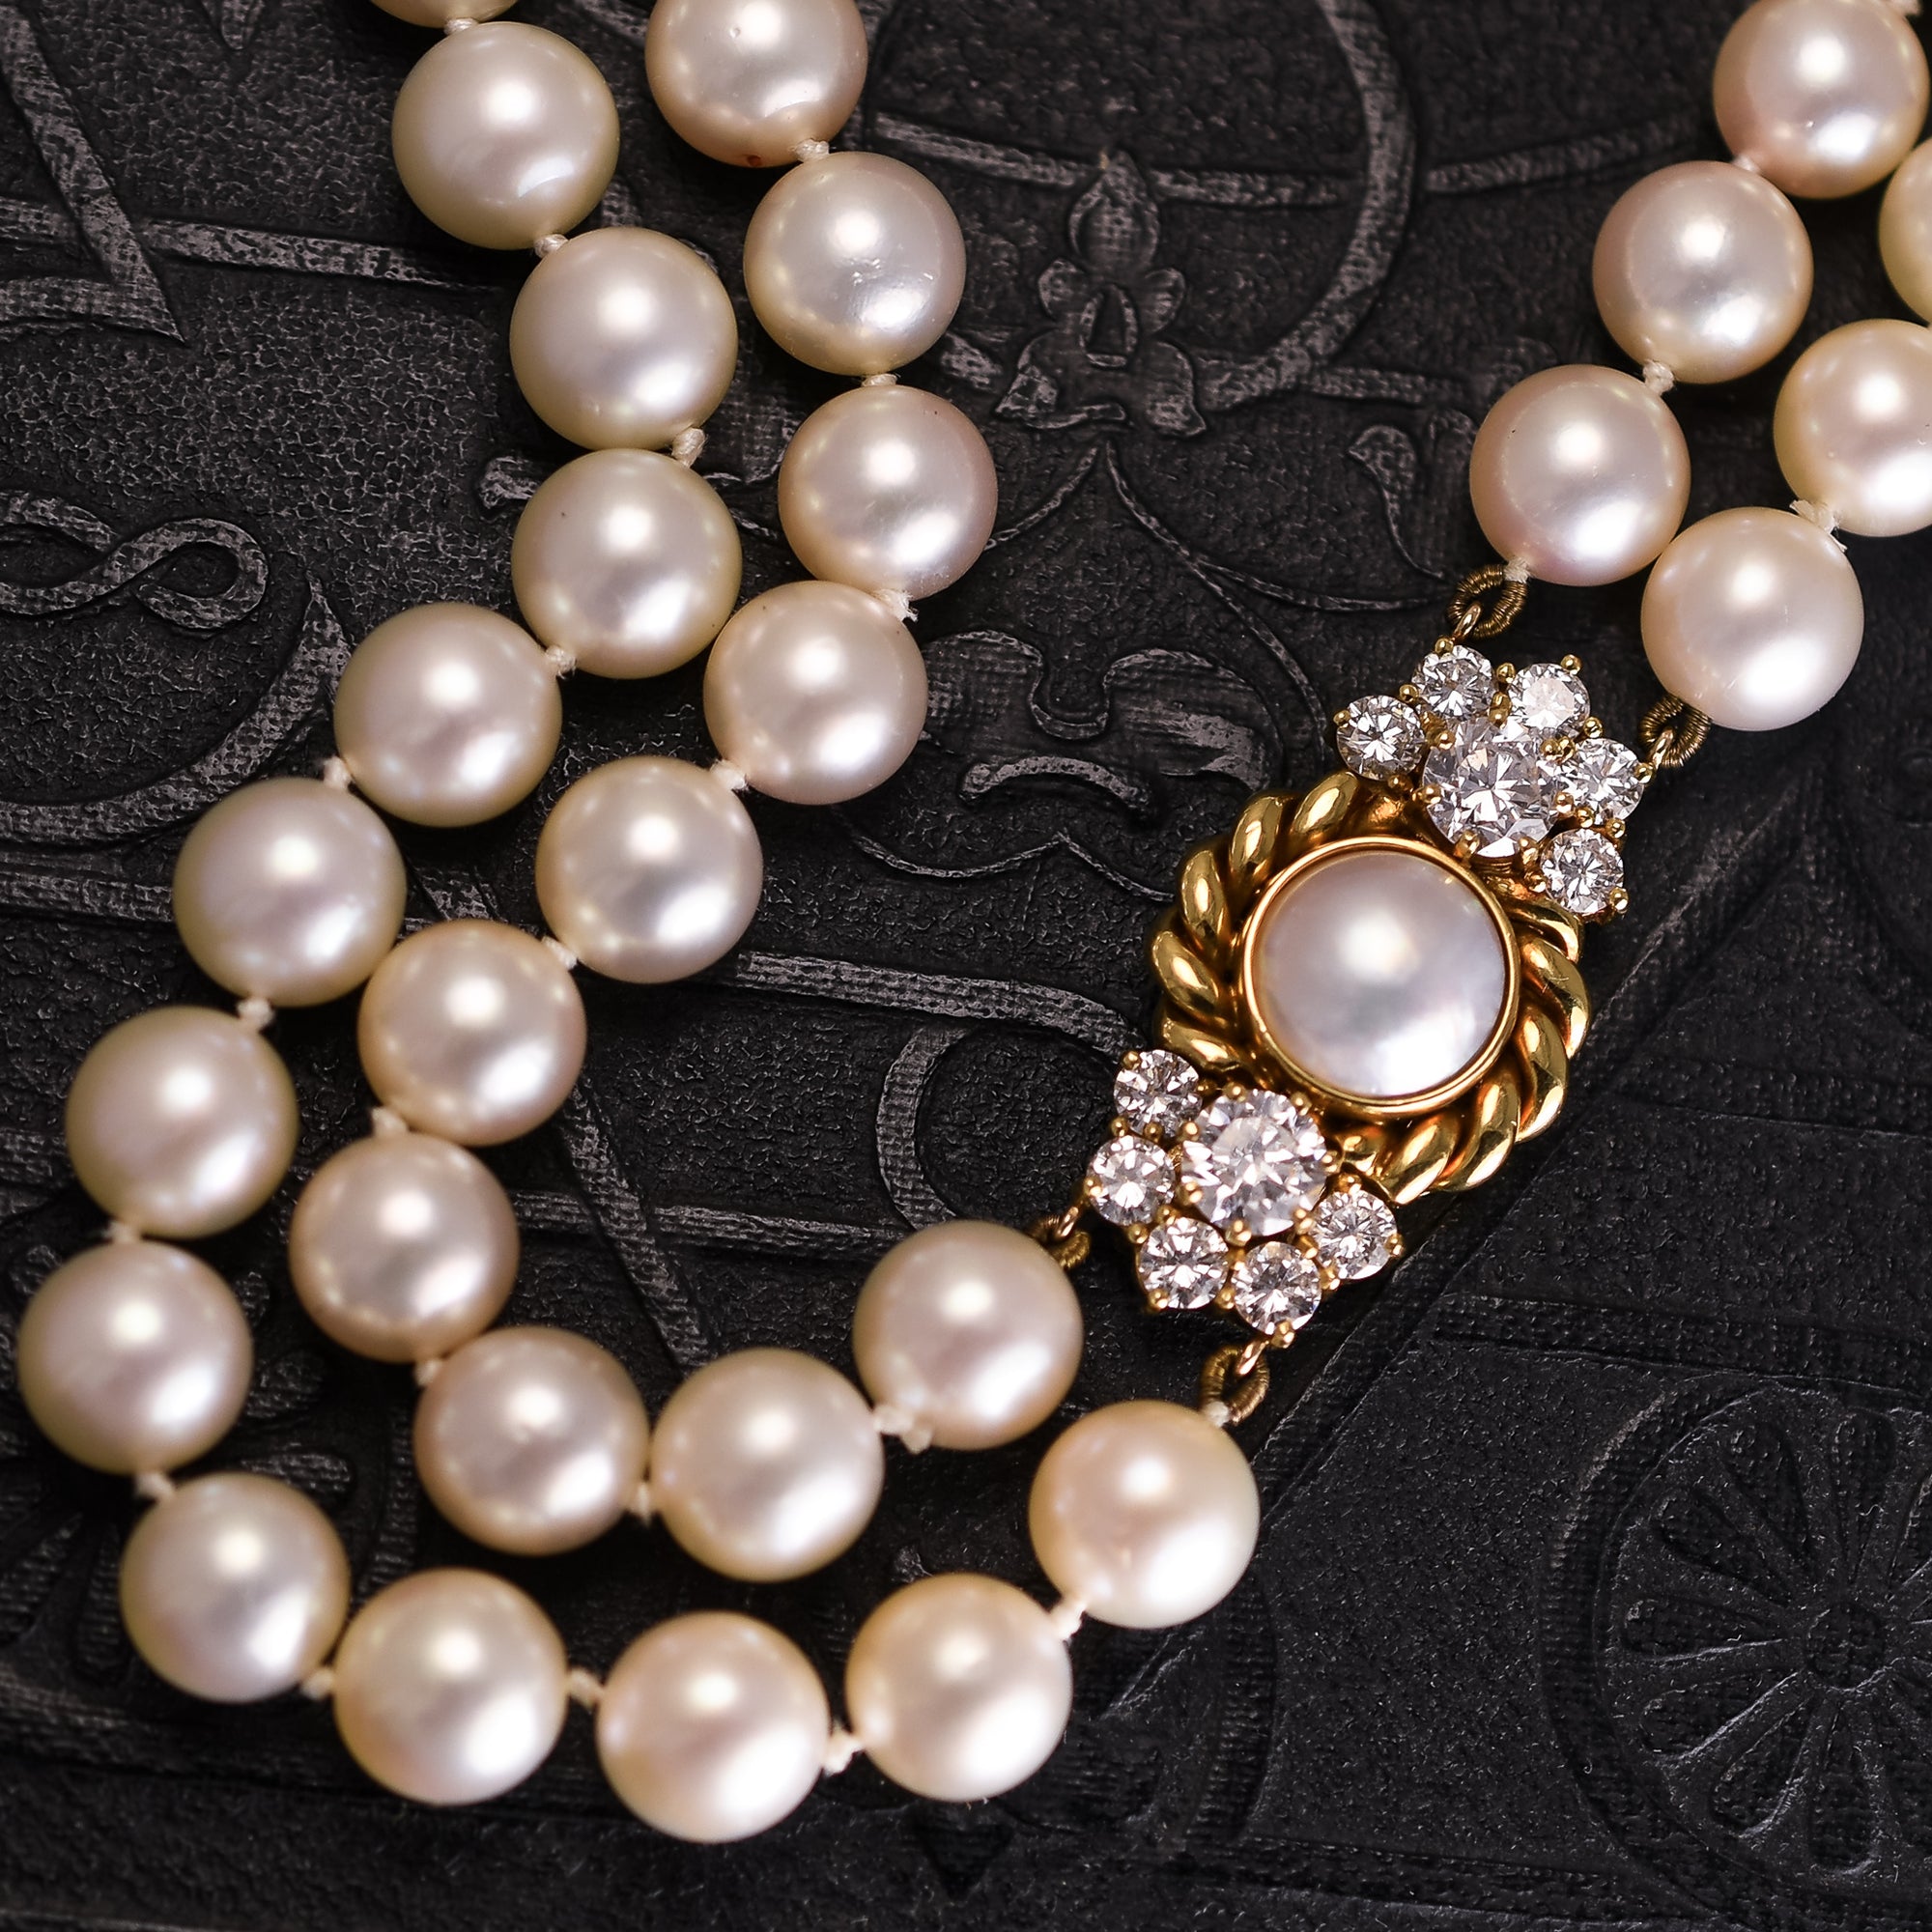 Vintage Double Strand Pearl Necklace with Diamond Clasp – Butter